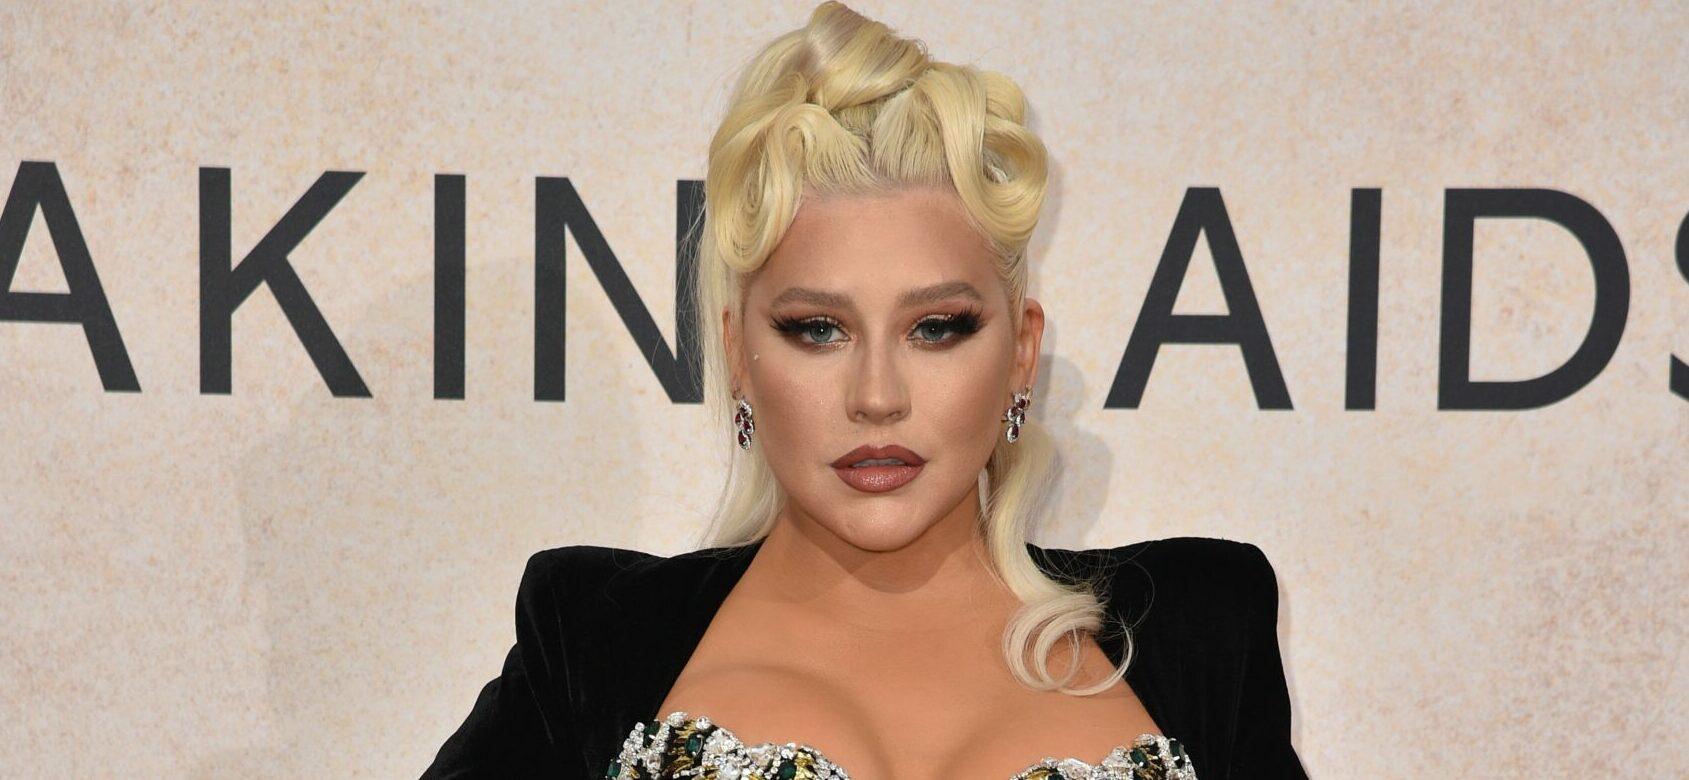 Christina Aguilera Shares Her Secret To Losing 40lbs & Gaining ‘New Curves’